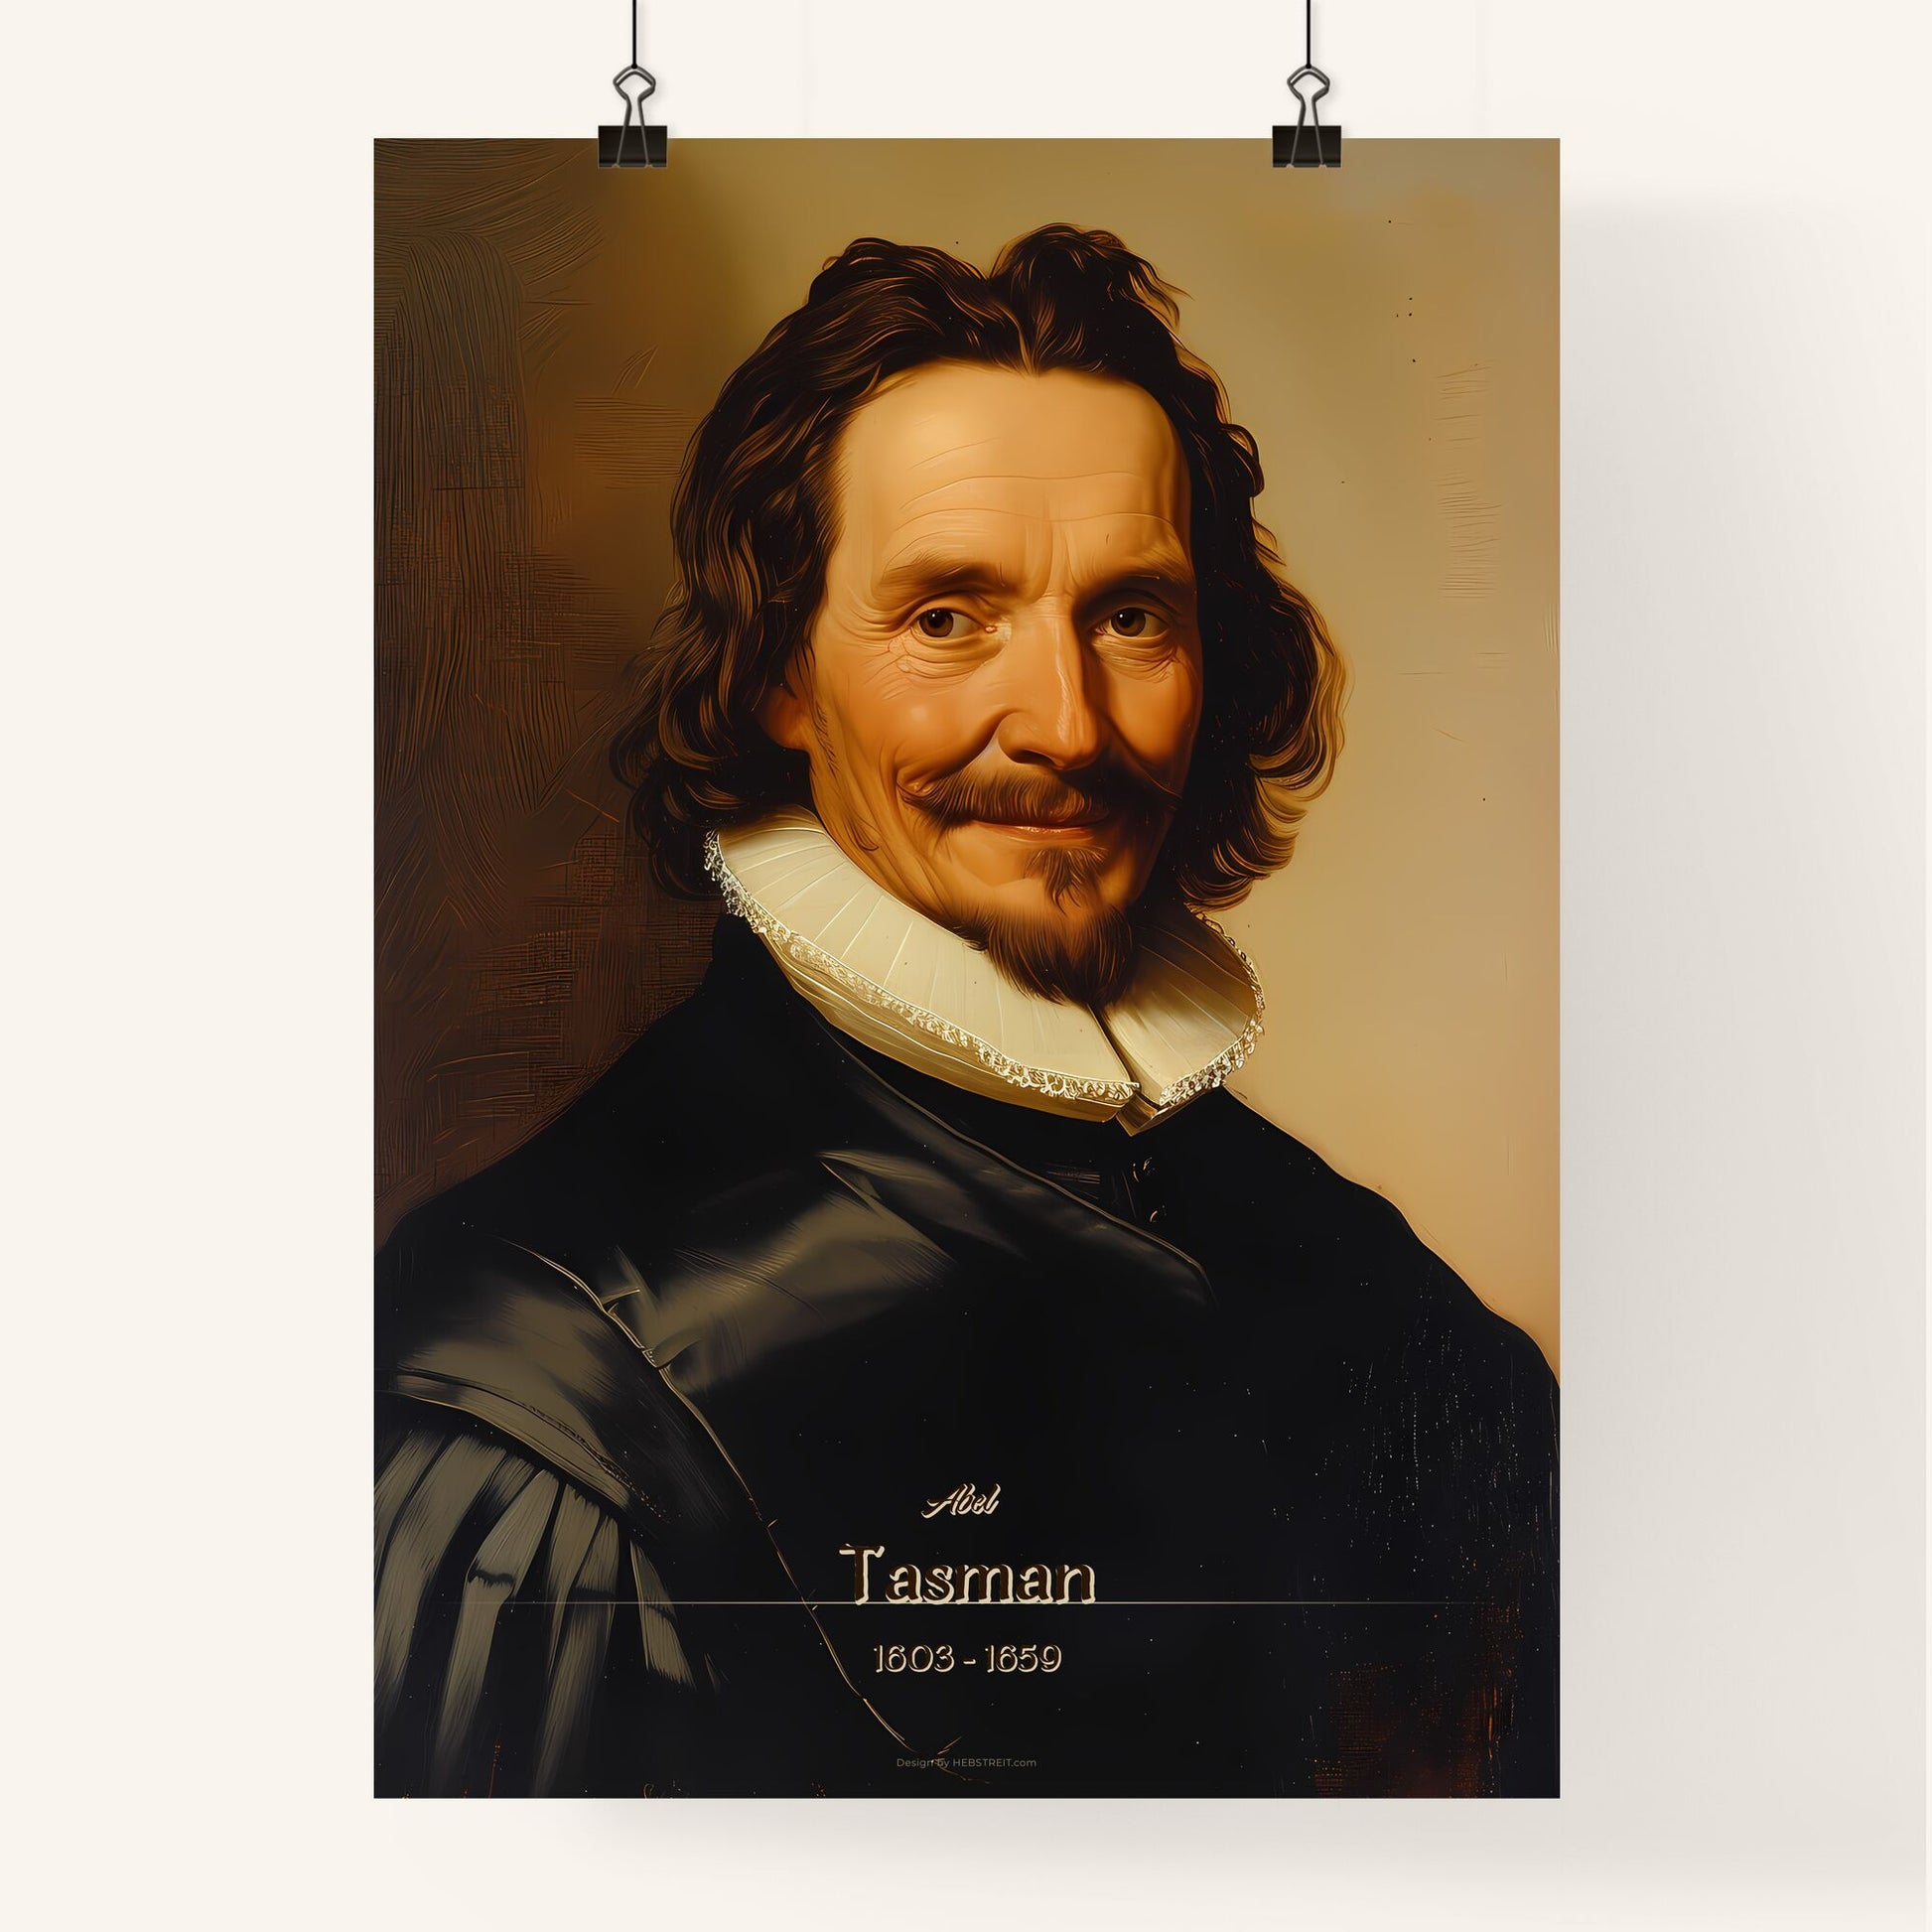 Abel, Tasman, 1603 - 1659, A Poster of a man with a beard and mustache wearing a black robe Default Title